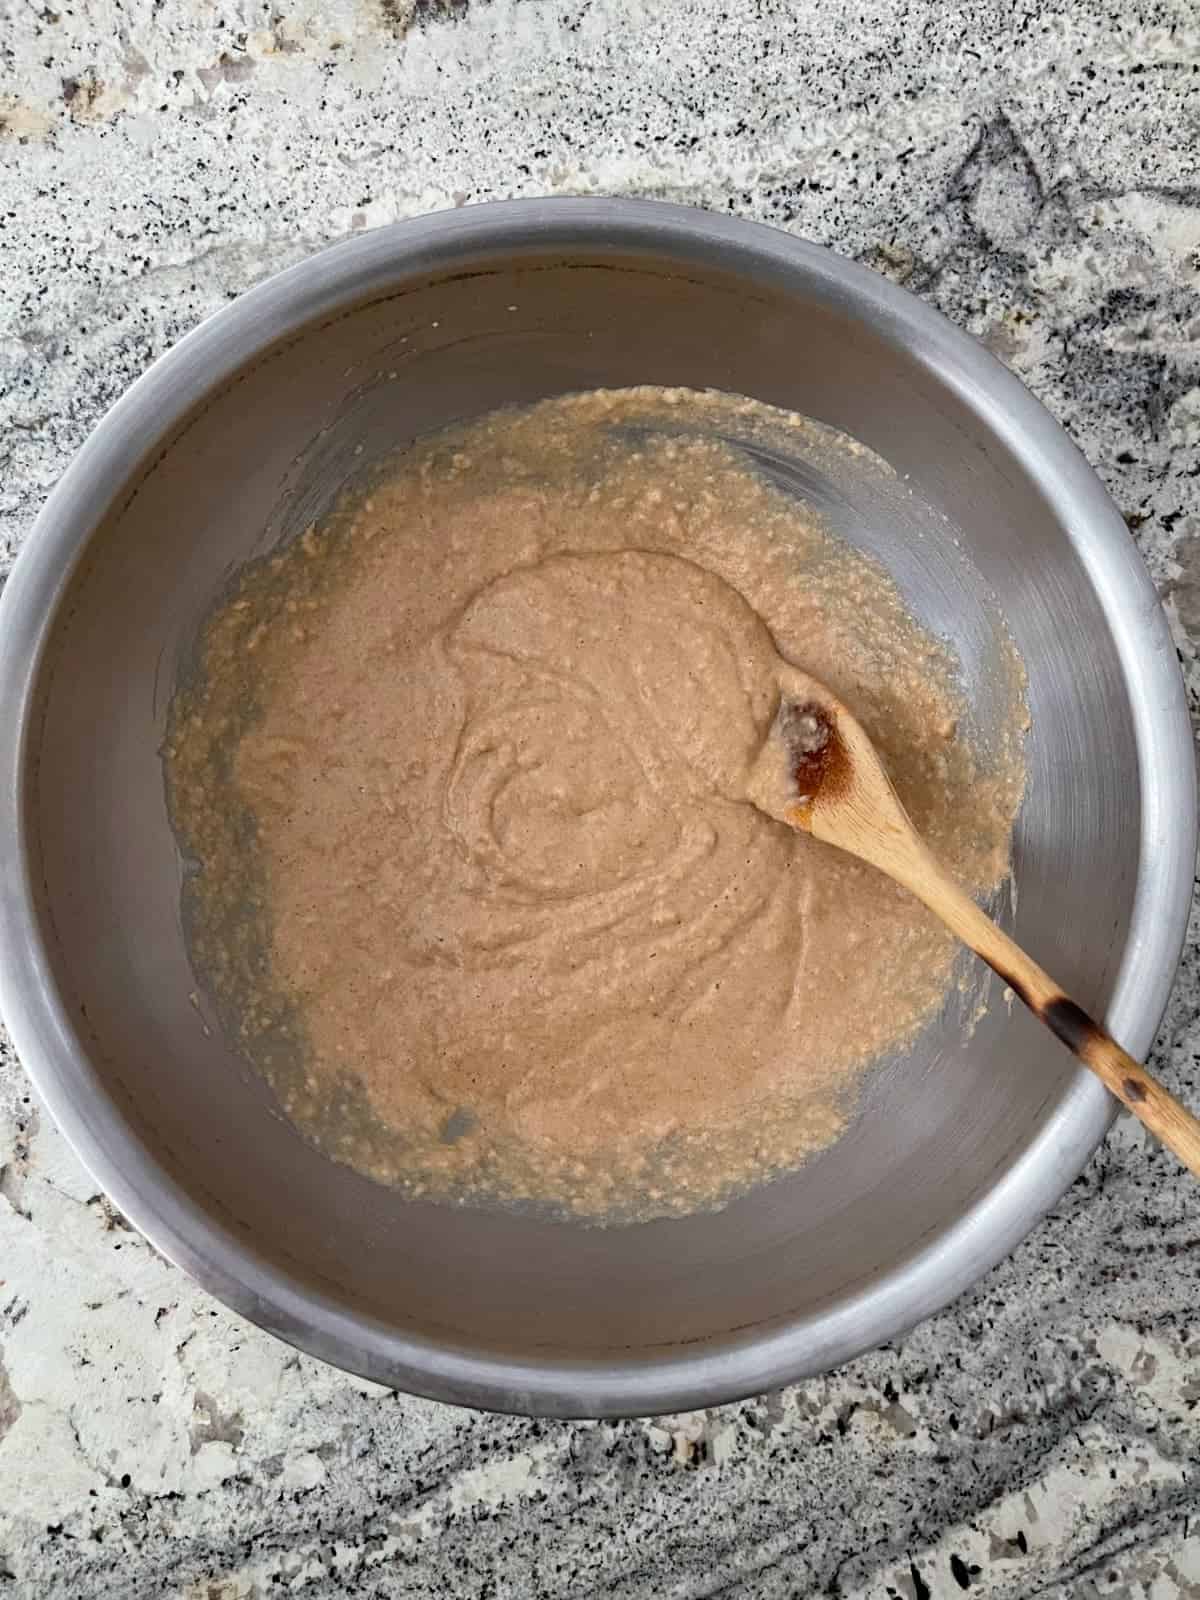 Mixing whole wheat donut batter with wooden spoon in mixing bowl.